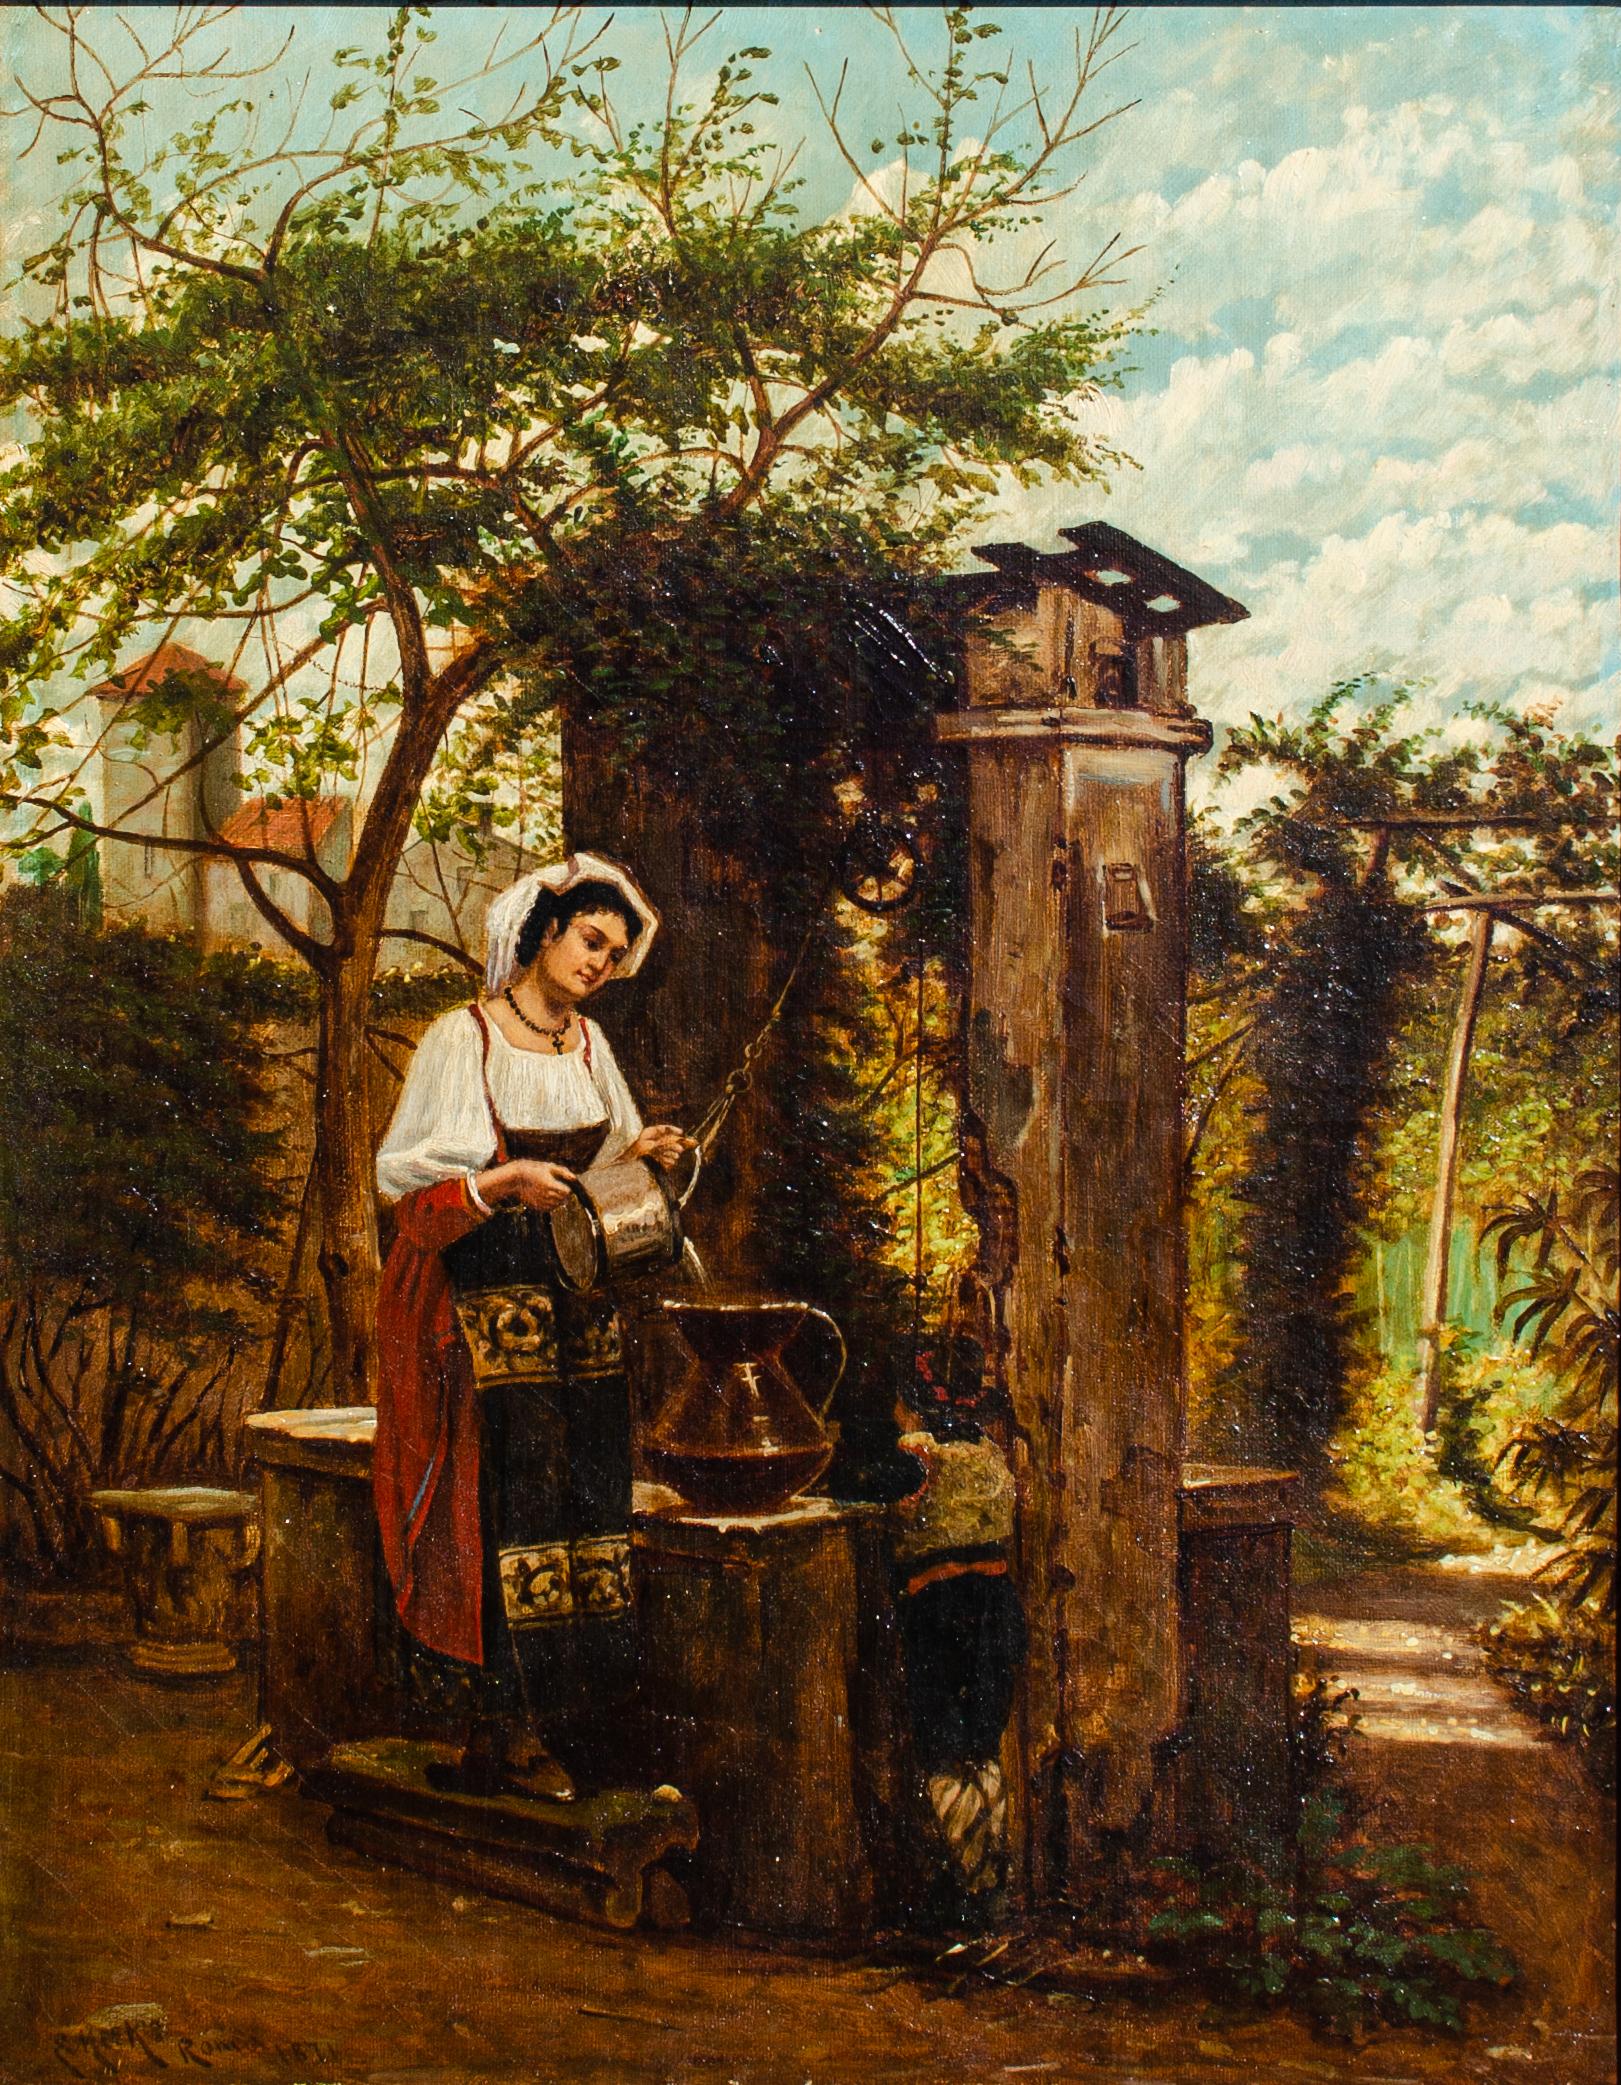 eugene meeks Figurative Painting - Eugene Meeks English oil painting of a woman at a well titled "Roma", dated 1871